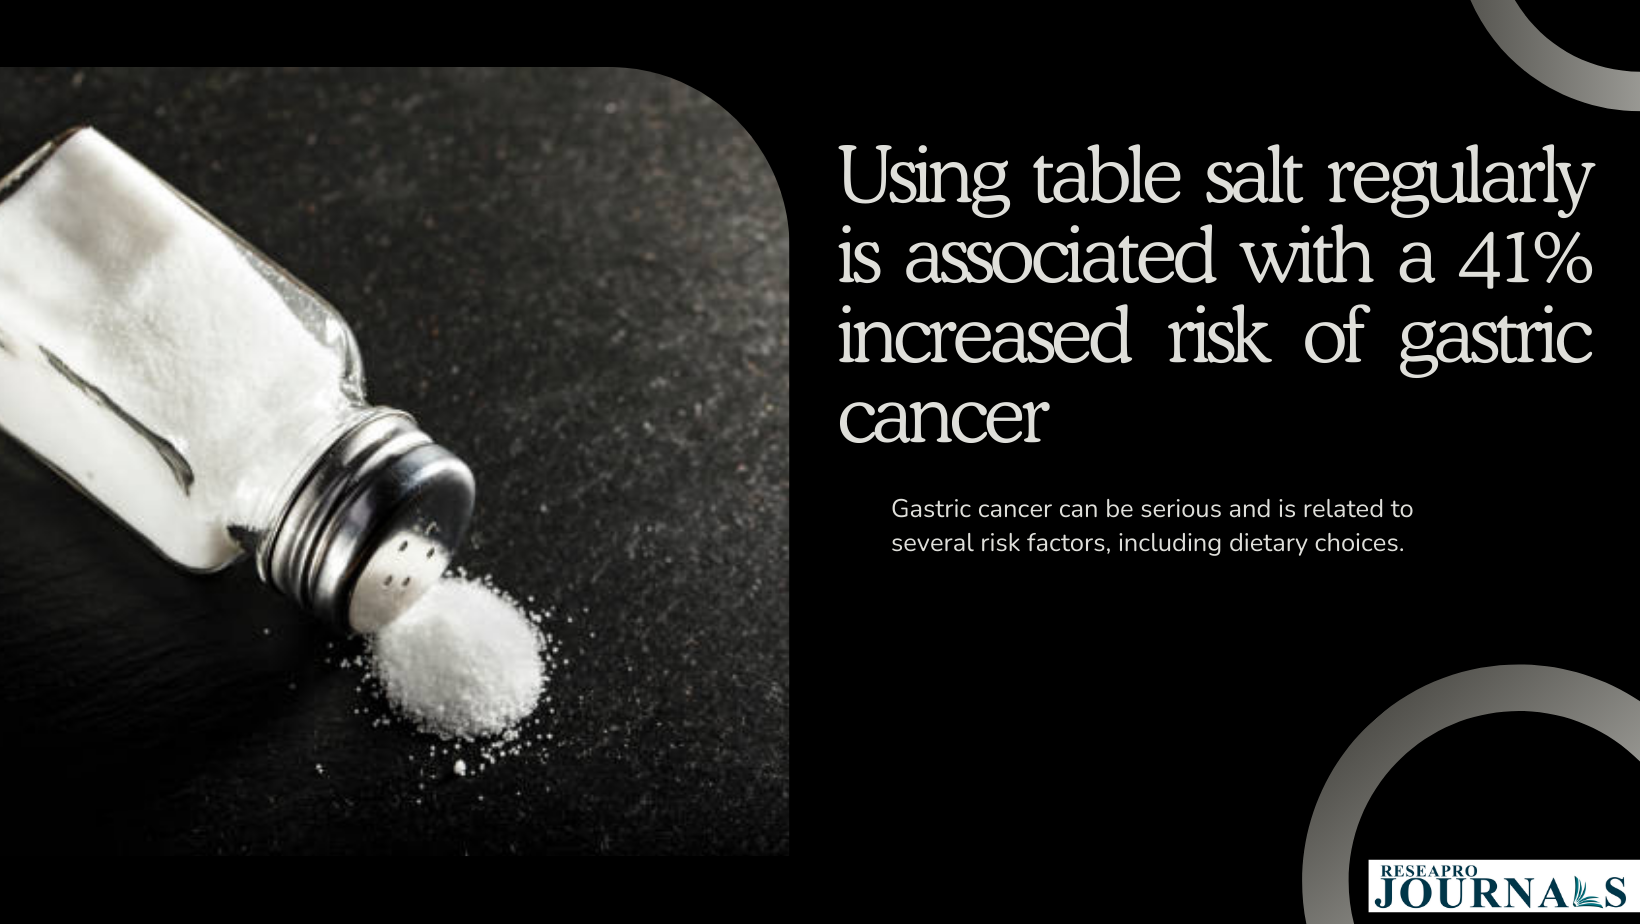 Using table salt regularly is associated with a 41% increased risk of gastric cancer